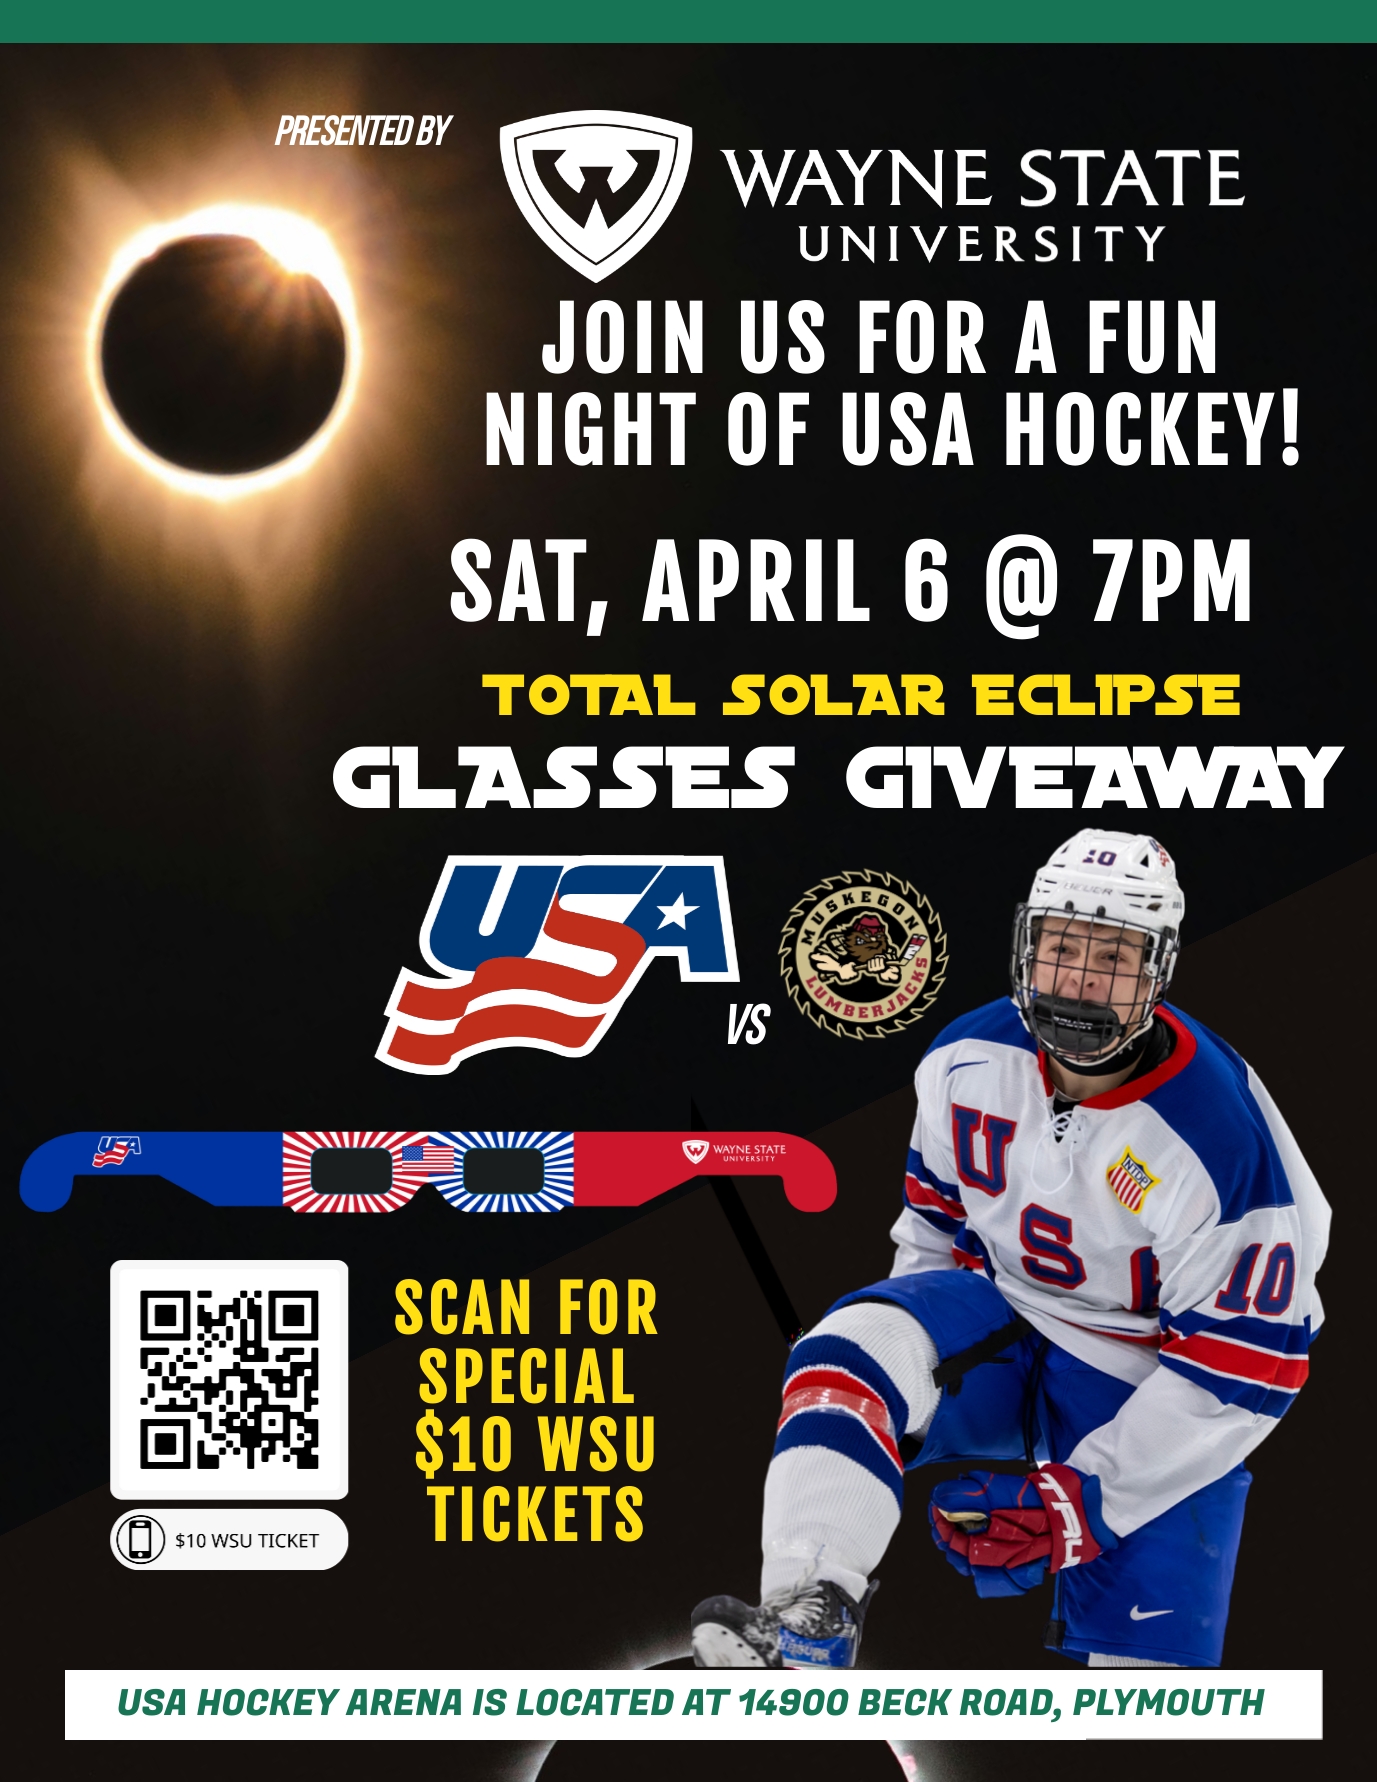 Flyer shares details of the USA Hockey Solar Eclipse Night at 7 p.m. on Saturday, April 6 - Flyer reads: Join us for a fun night of USA Hockey! 